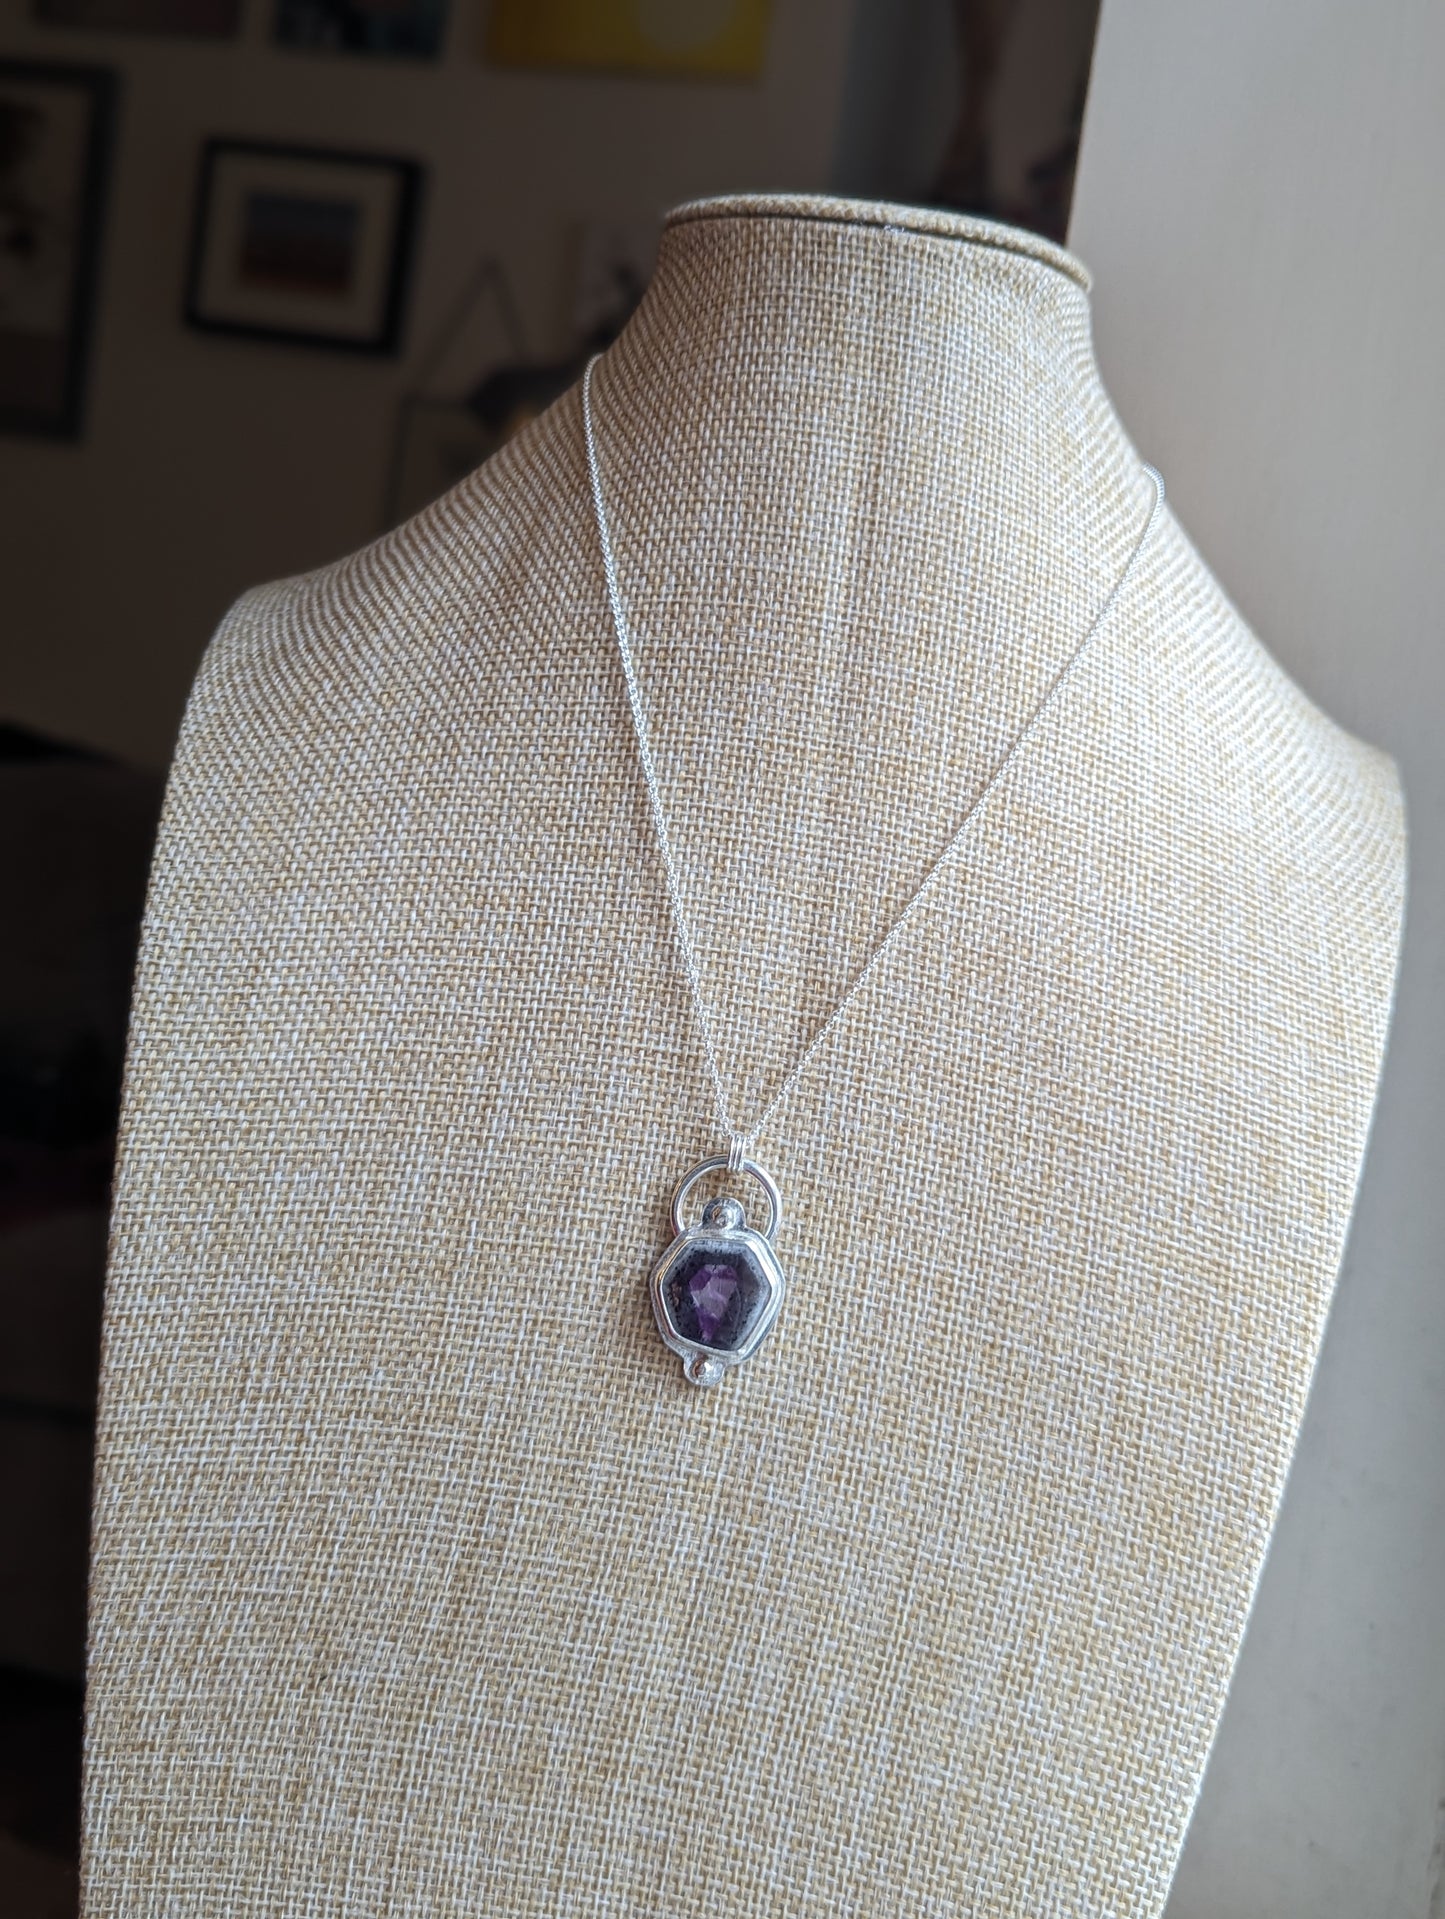 Trapiche Amethyst Sterling Silver Necklace